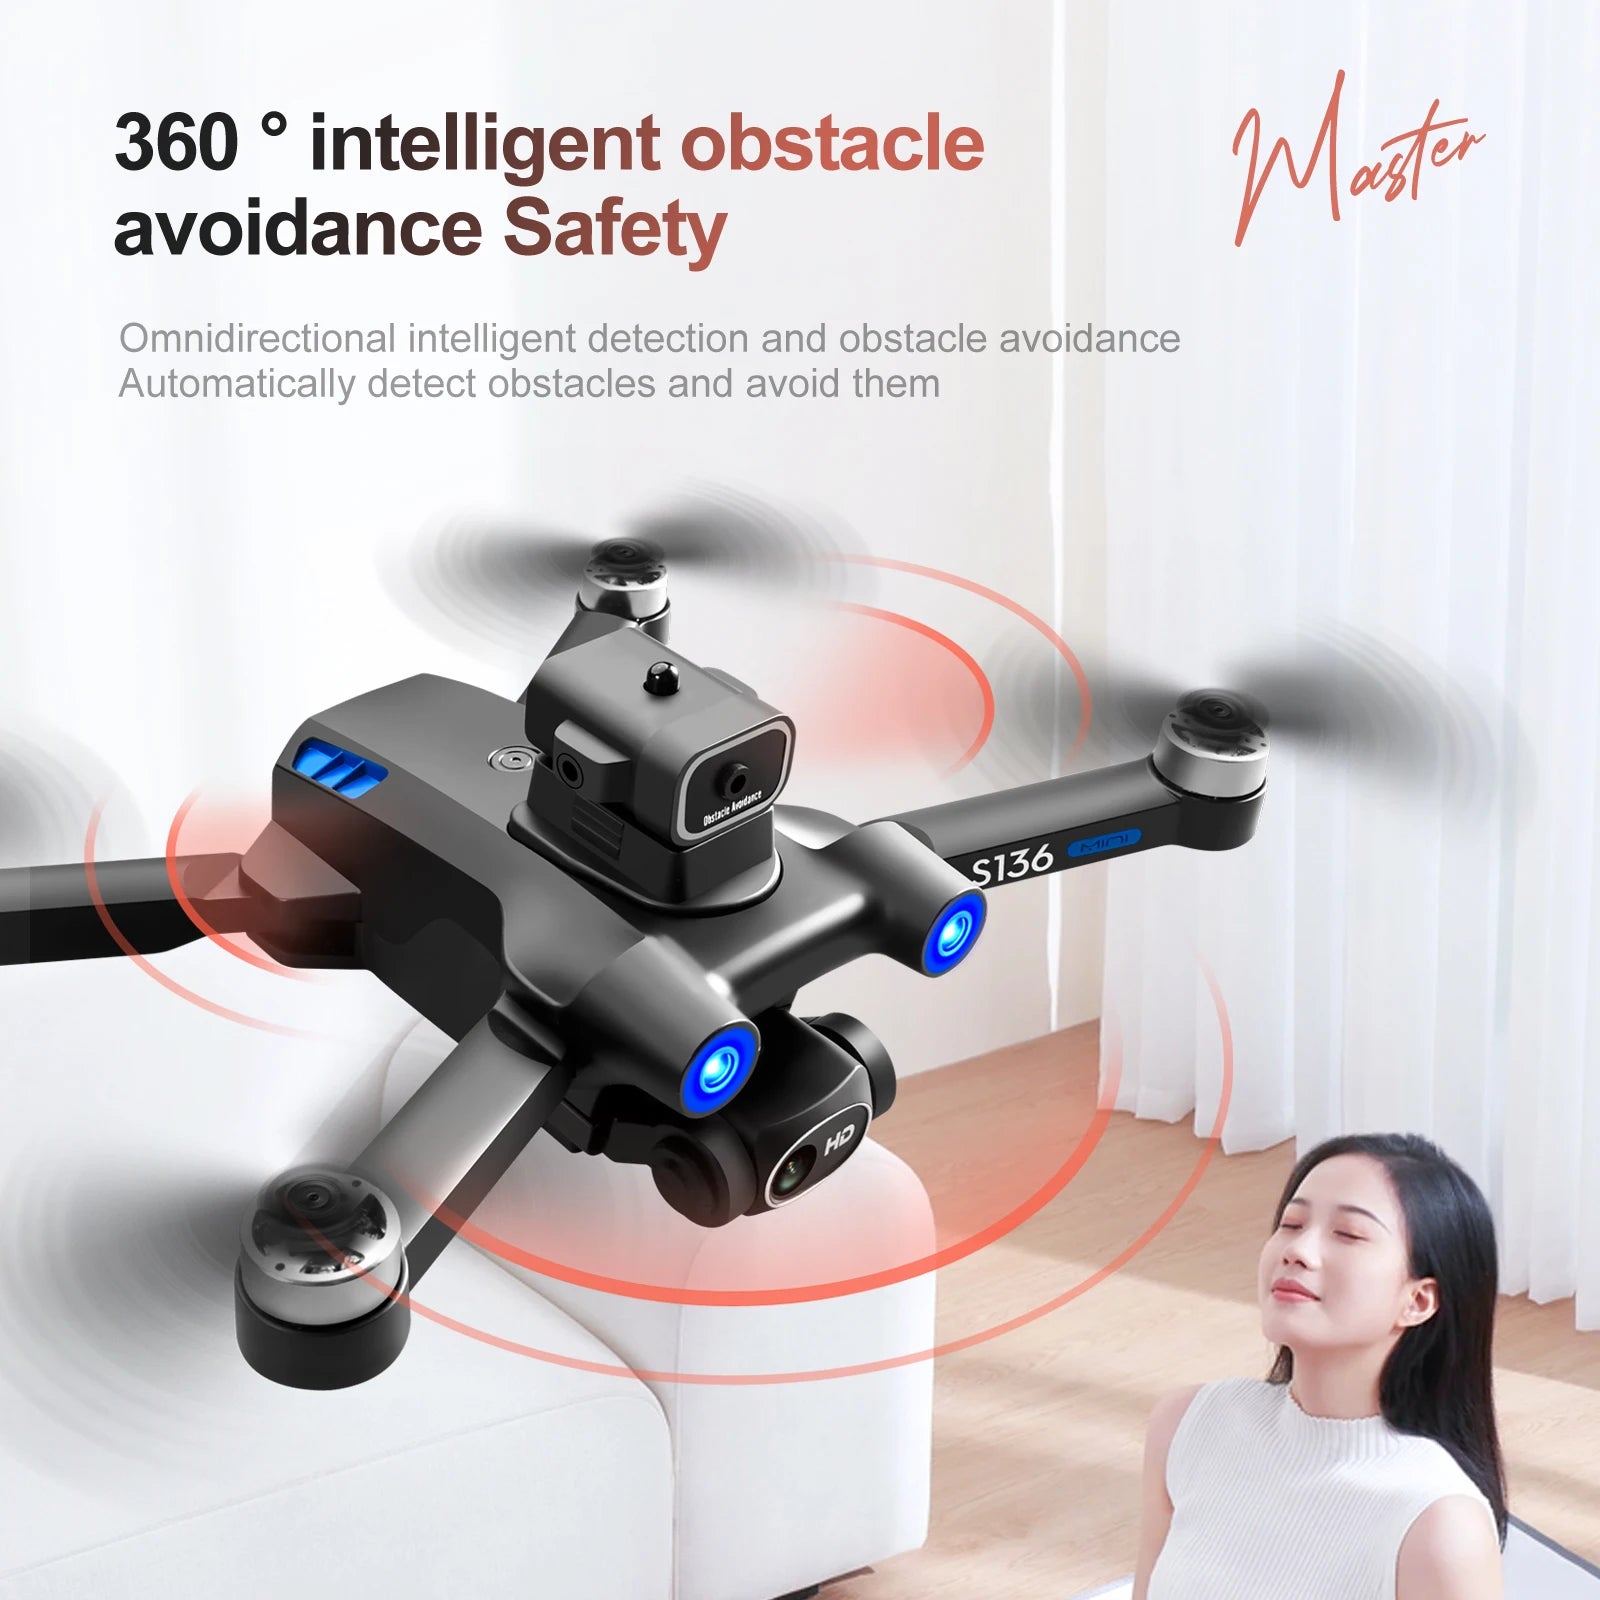 S136 GPS Drone, 360 intelligent obstacle Msdi avoidance Safety Omnidirectional intelligent detection and obstacle avoidance Automatic